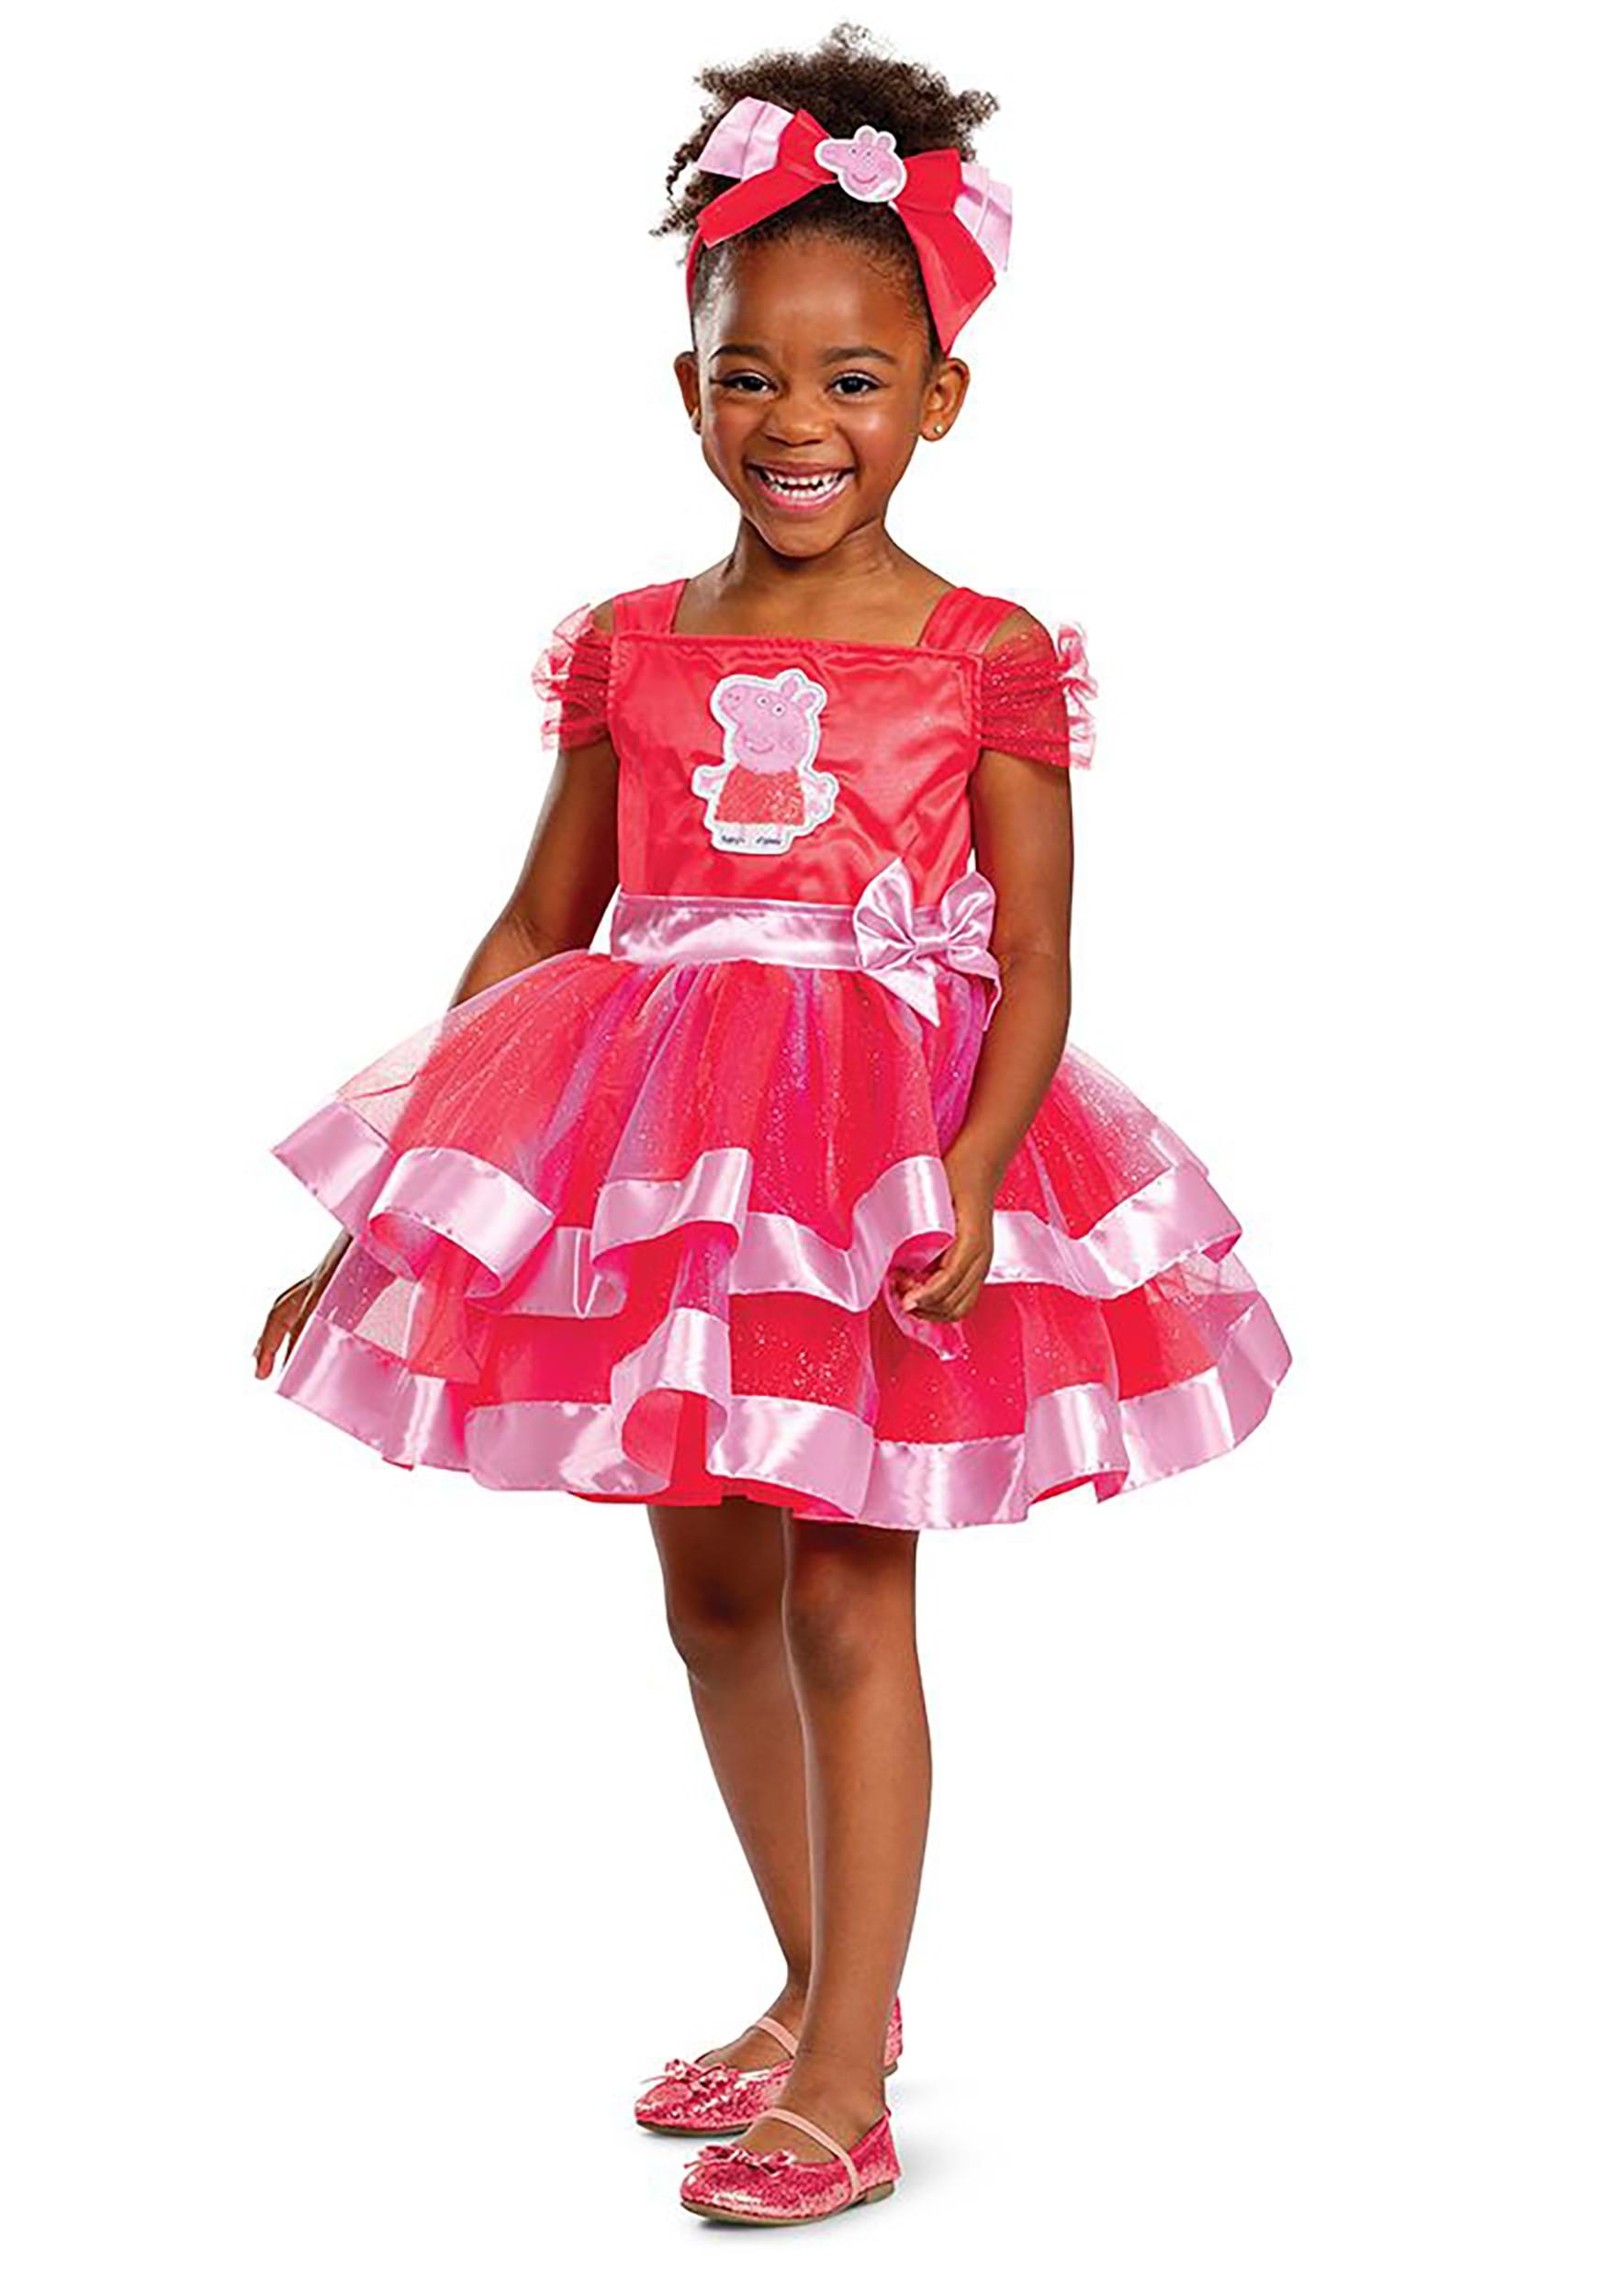 Image of Peppa Pig Tutu Costume for Toddlers ID DI120849-3T/4T